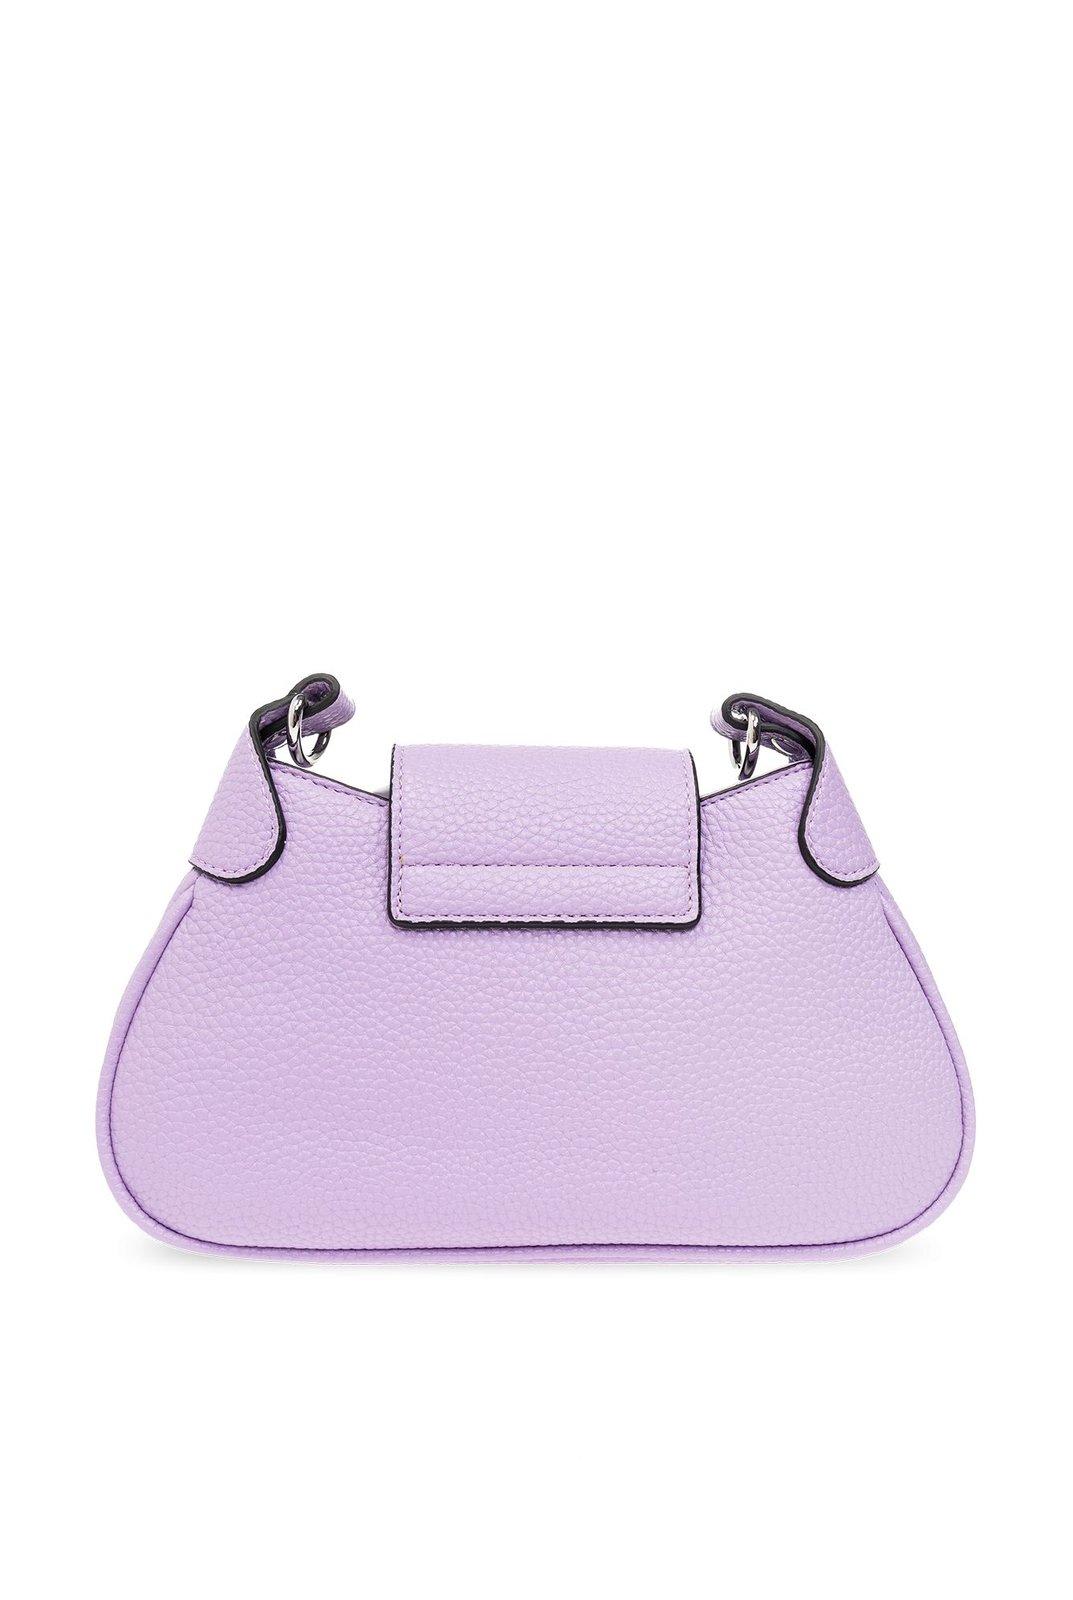 Shop Versace Jeans Couture Logo Plaque Small Crossbody Bag In Purple